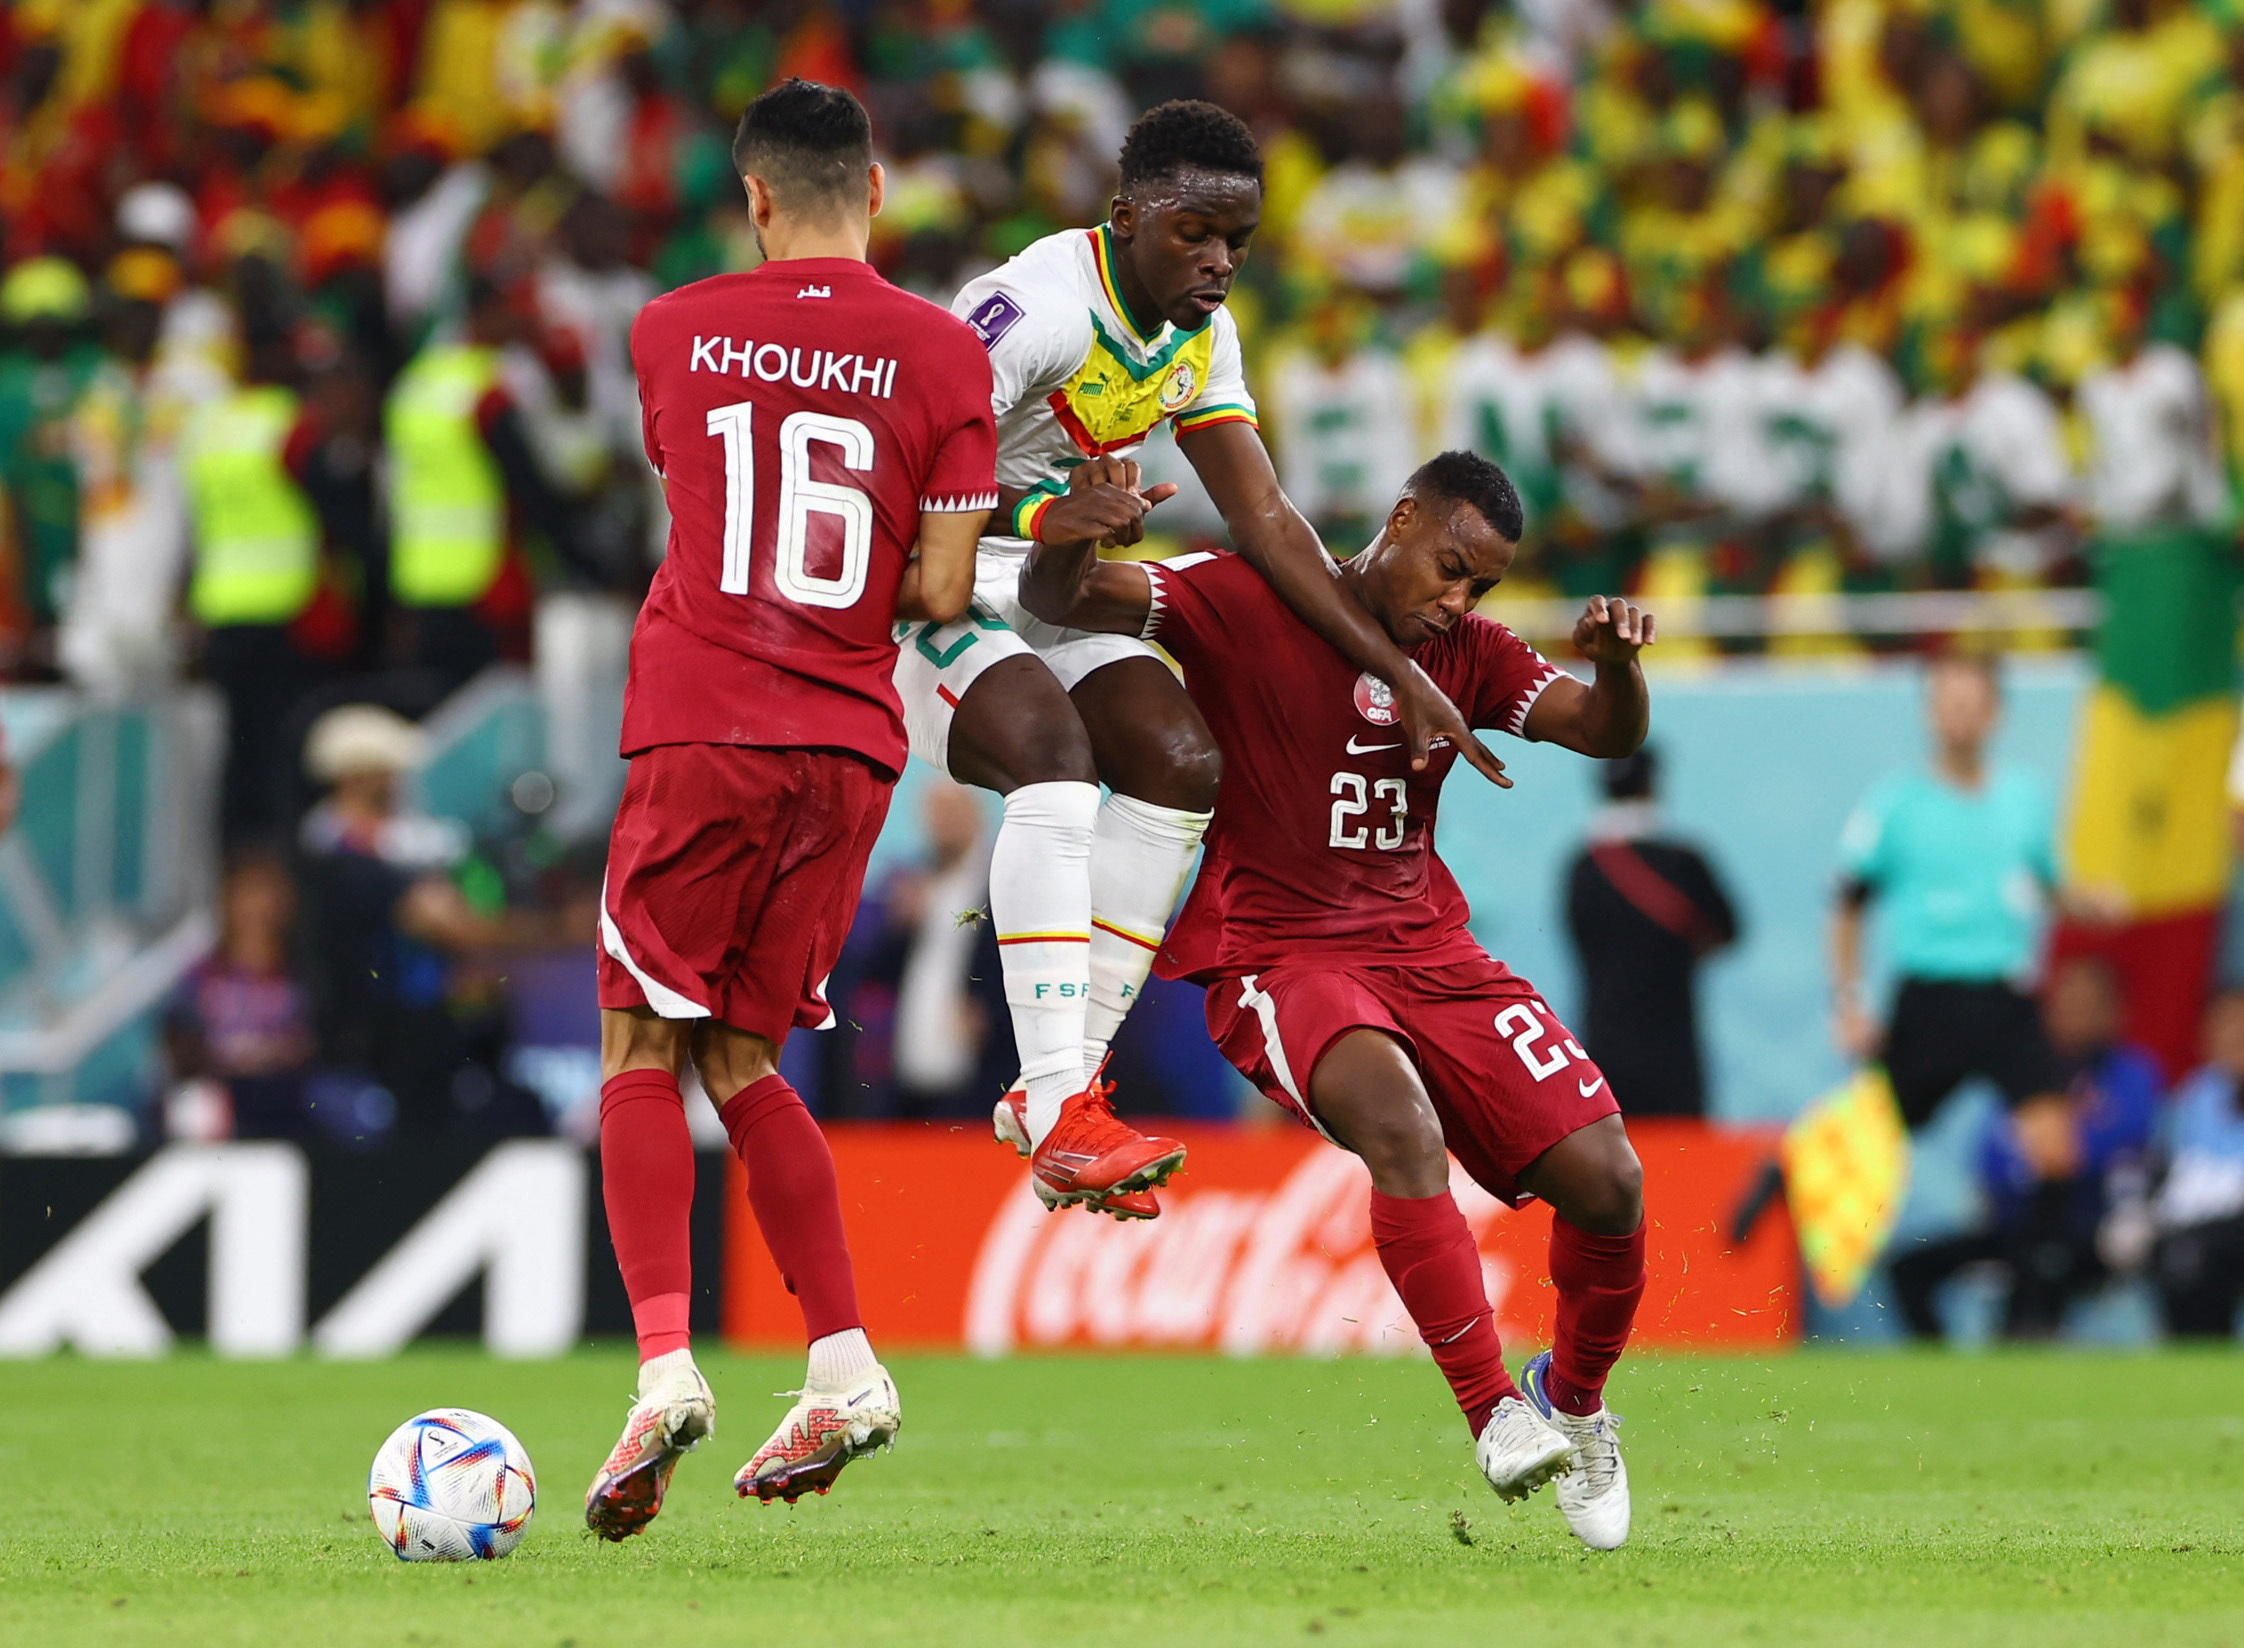 Hosts Qatar on verge of exiting World Cup after Senegal loss